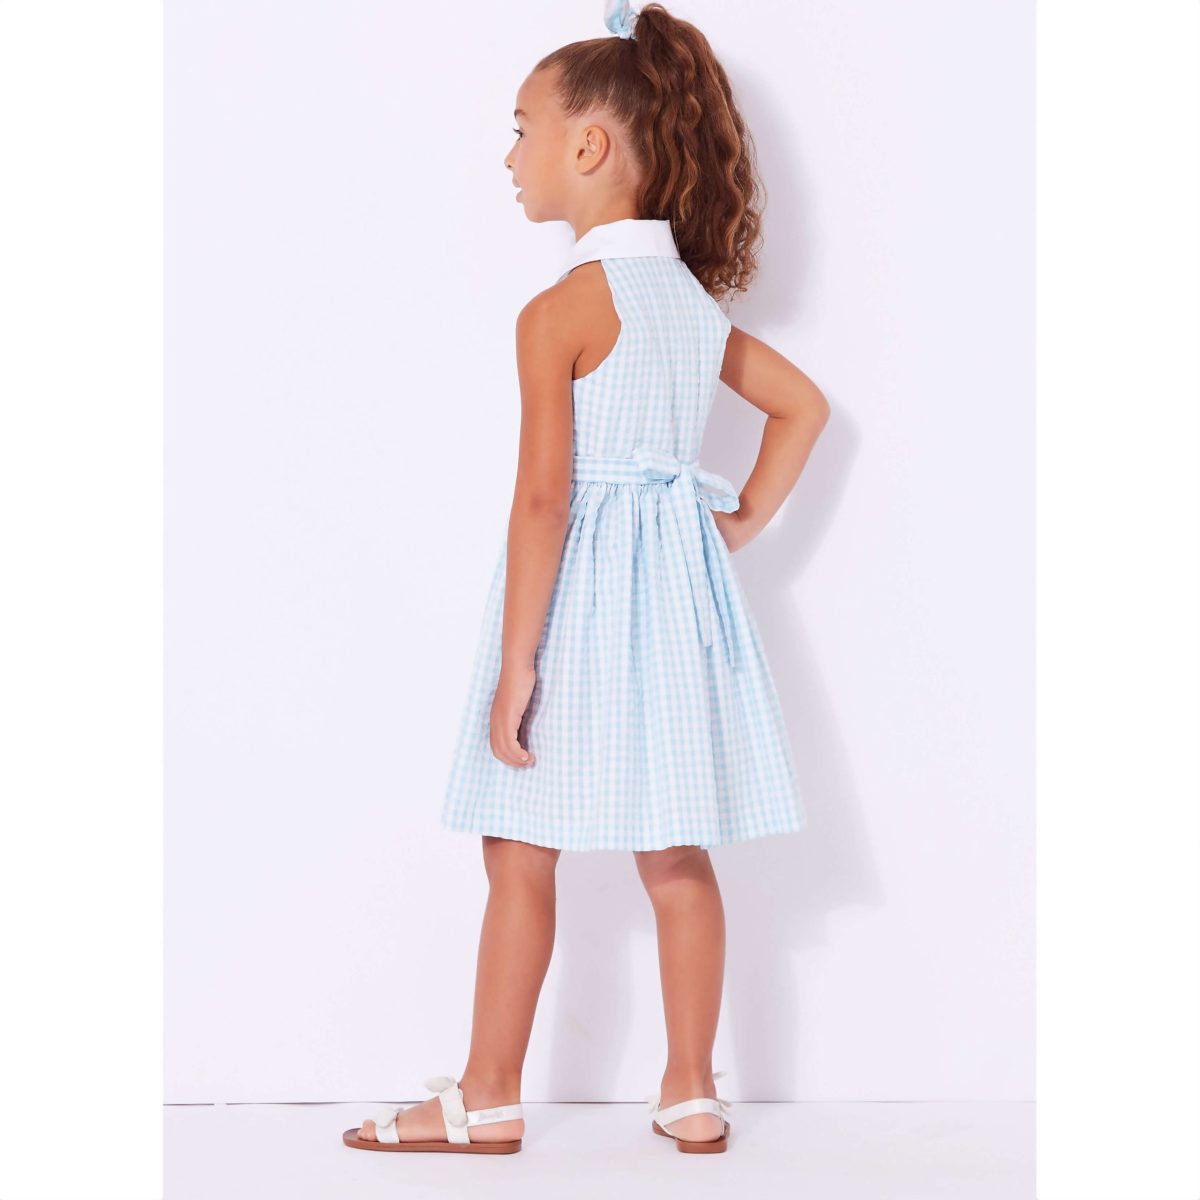 New Look Sewing Pattern N6727 Children's and Girls' Dresses